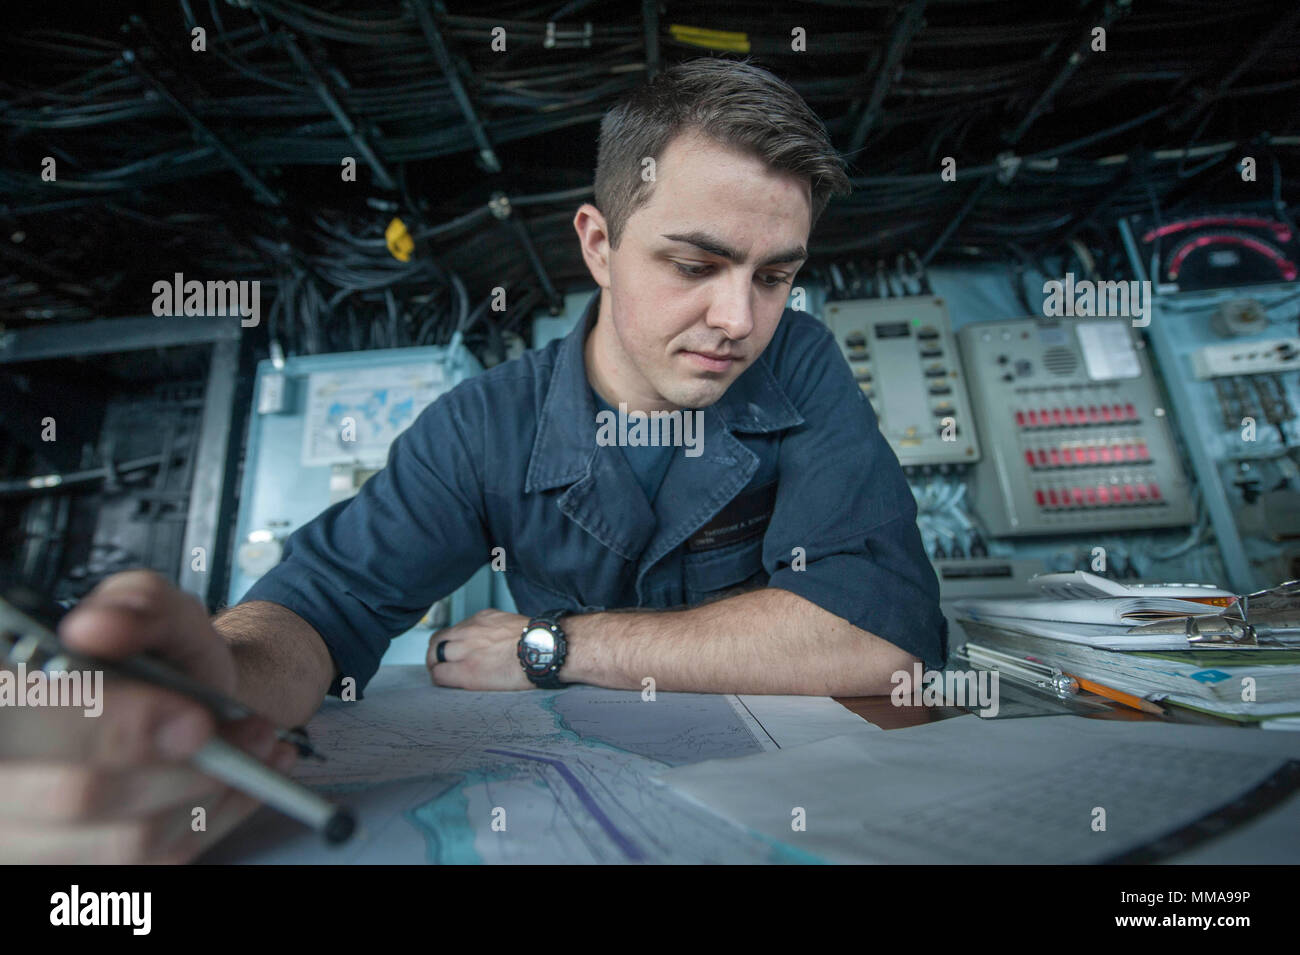 170929-N-ZS023-010 U.S. 5TH FLEET AREA OF OPERATIONS (Sept. 29, 2017) Quartermaster Seaman Ted Schulz, a native of Berryville, Virginia, assigned to the navigation department aboard the amphibious assault ship USS America (LHA 6), plots the ship’s course from the bridge. America is the flagship for the America Amphibious Ready Group and, with the embarked 15th Marine Expeditionary Unit, is deployed to the U.S. 5th Fleet area of operations in support of maritime security operations to reassure allies and partners and preserve the freedom of navigation and the free flow of commerce in the region Stock Photo